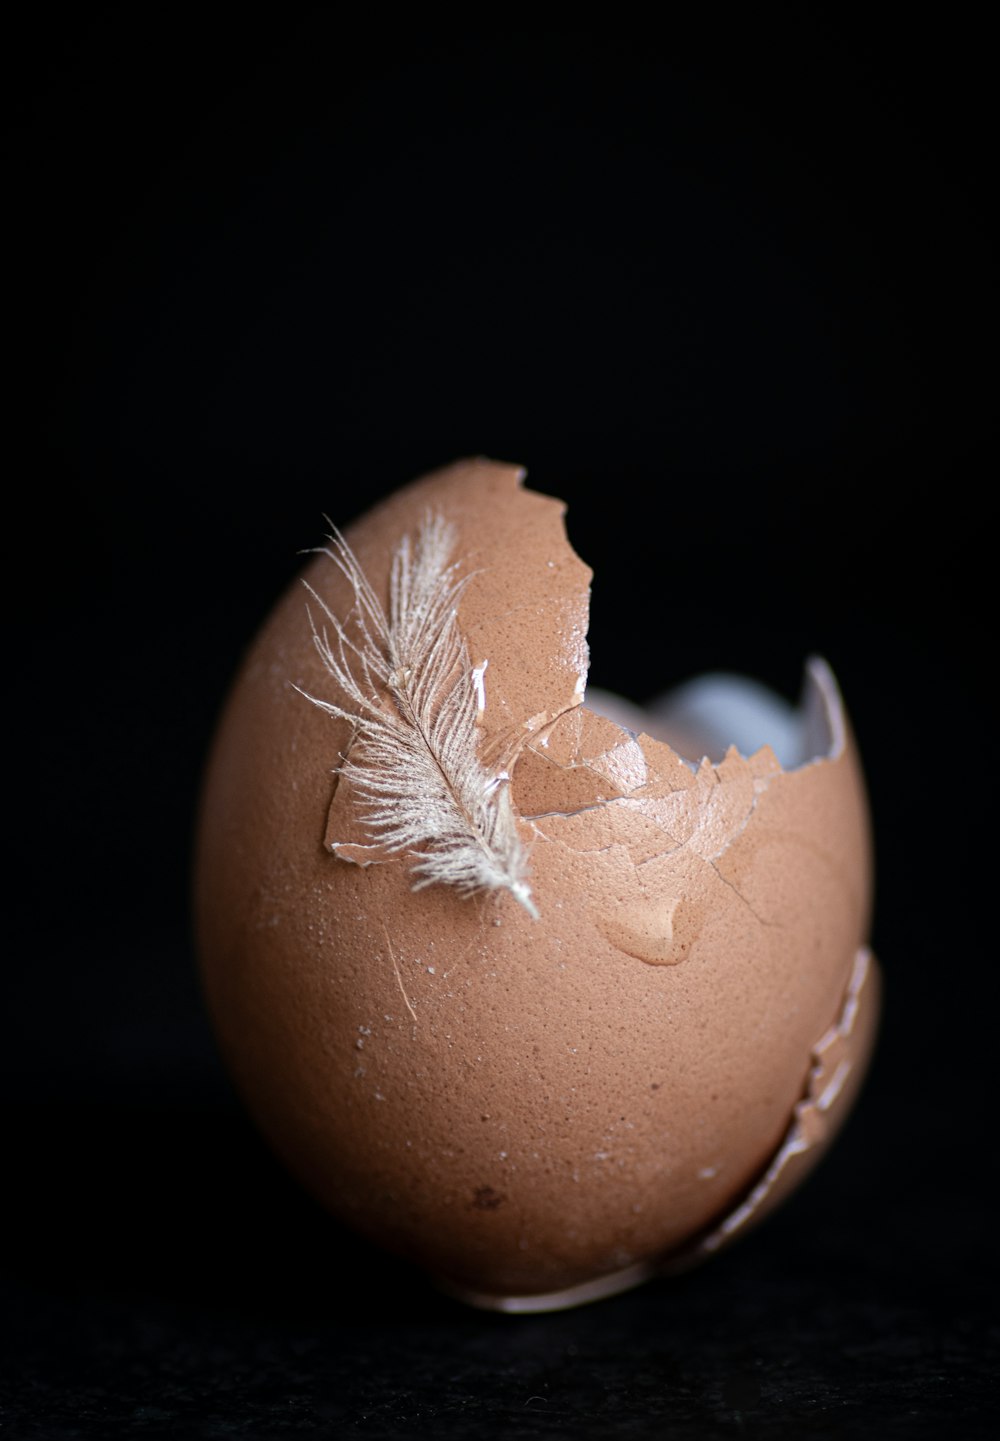 brown egg with white flower petals